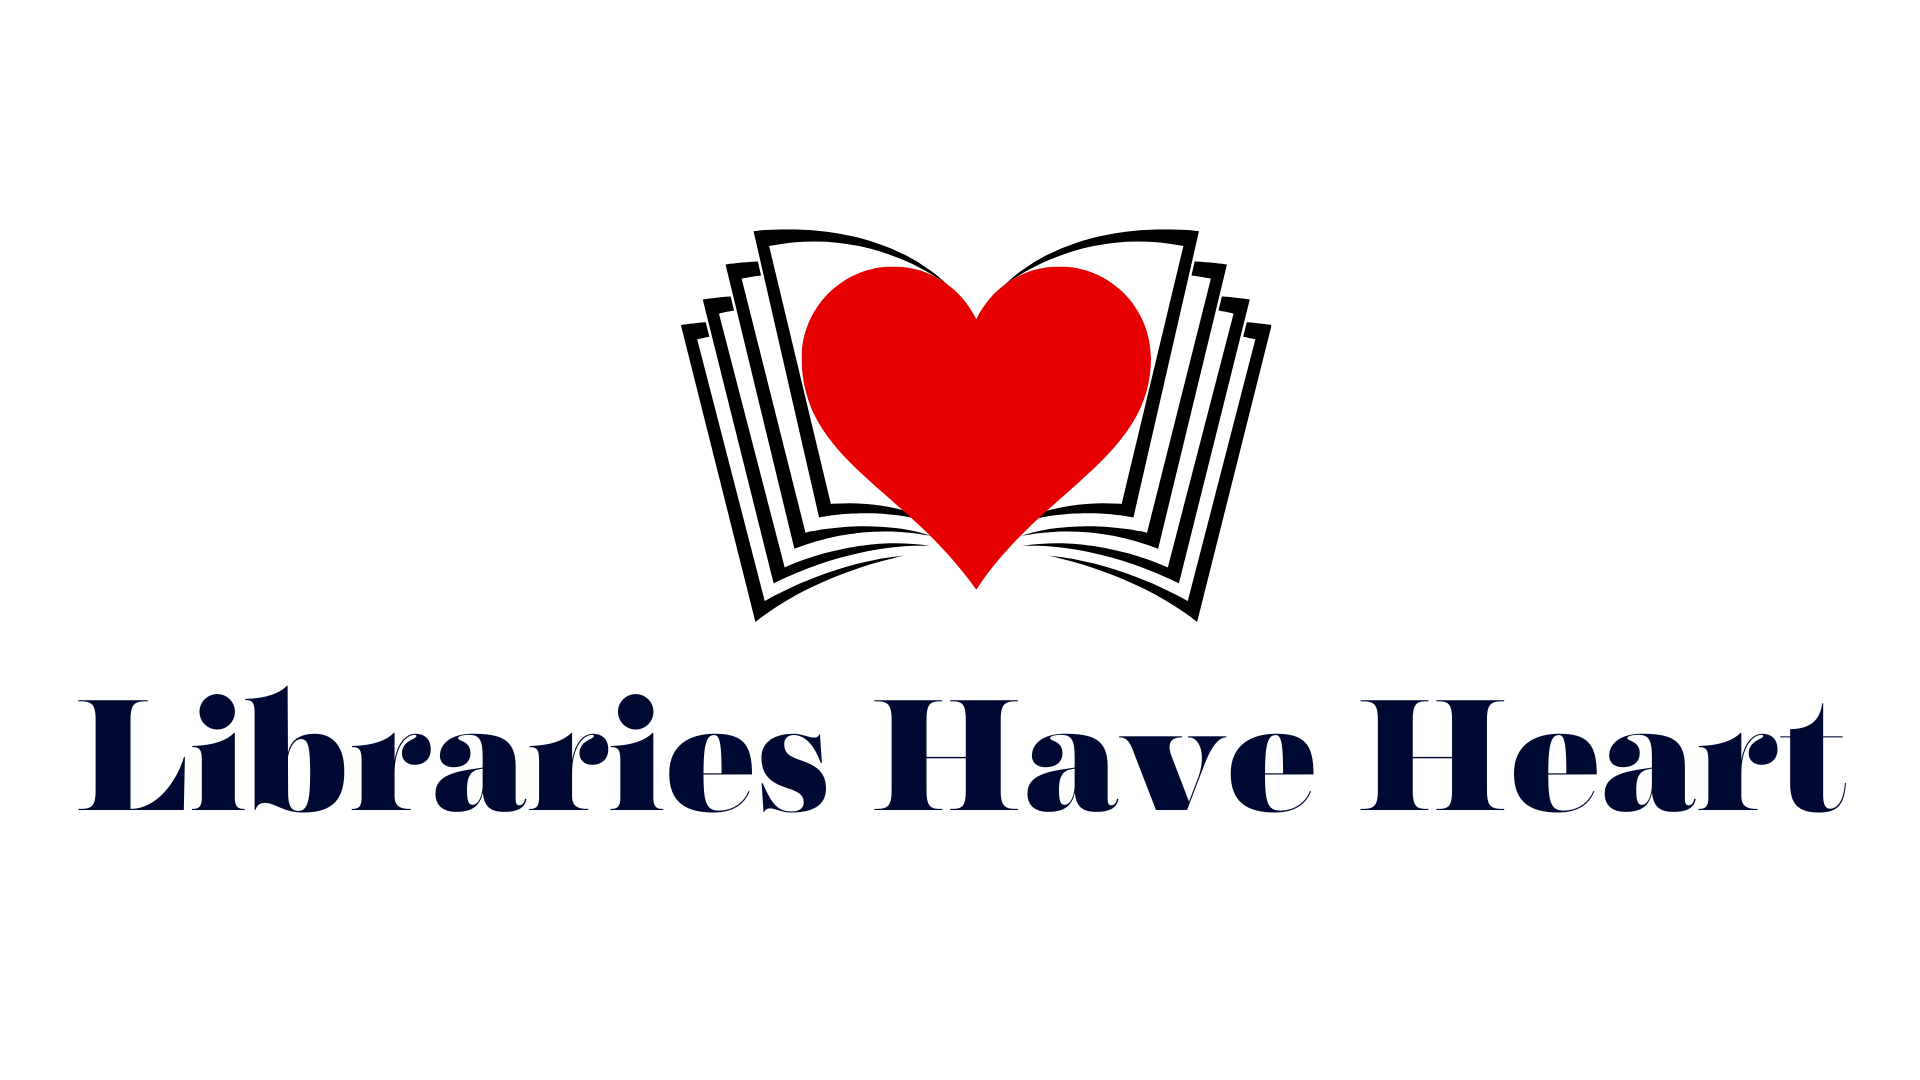 Libraries have heart